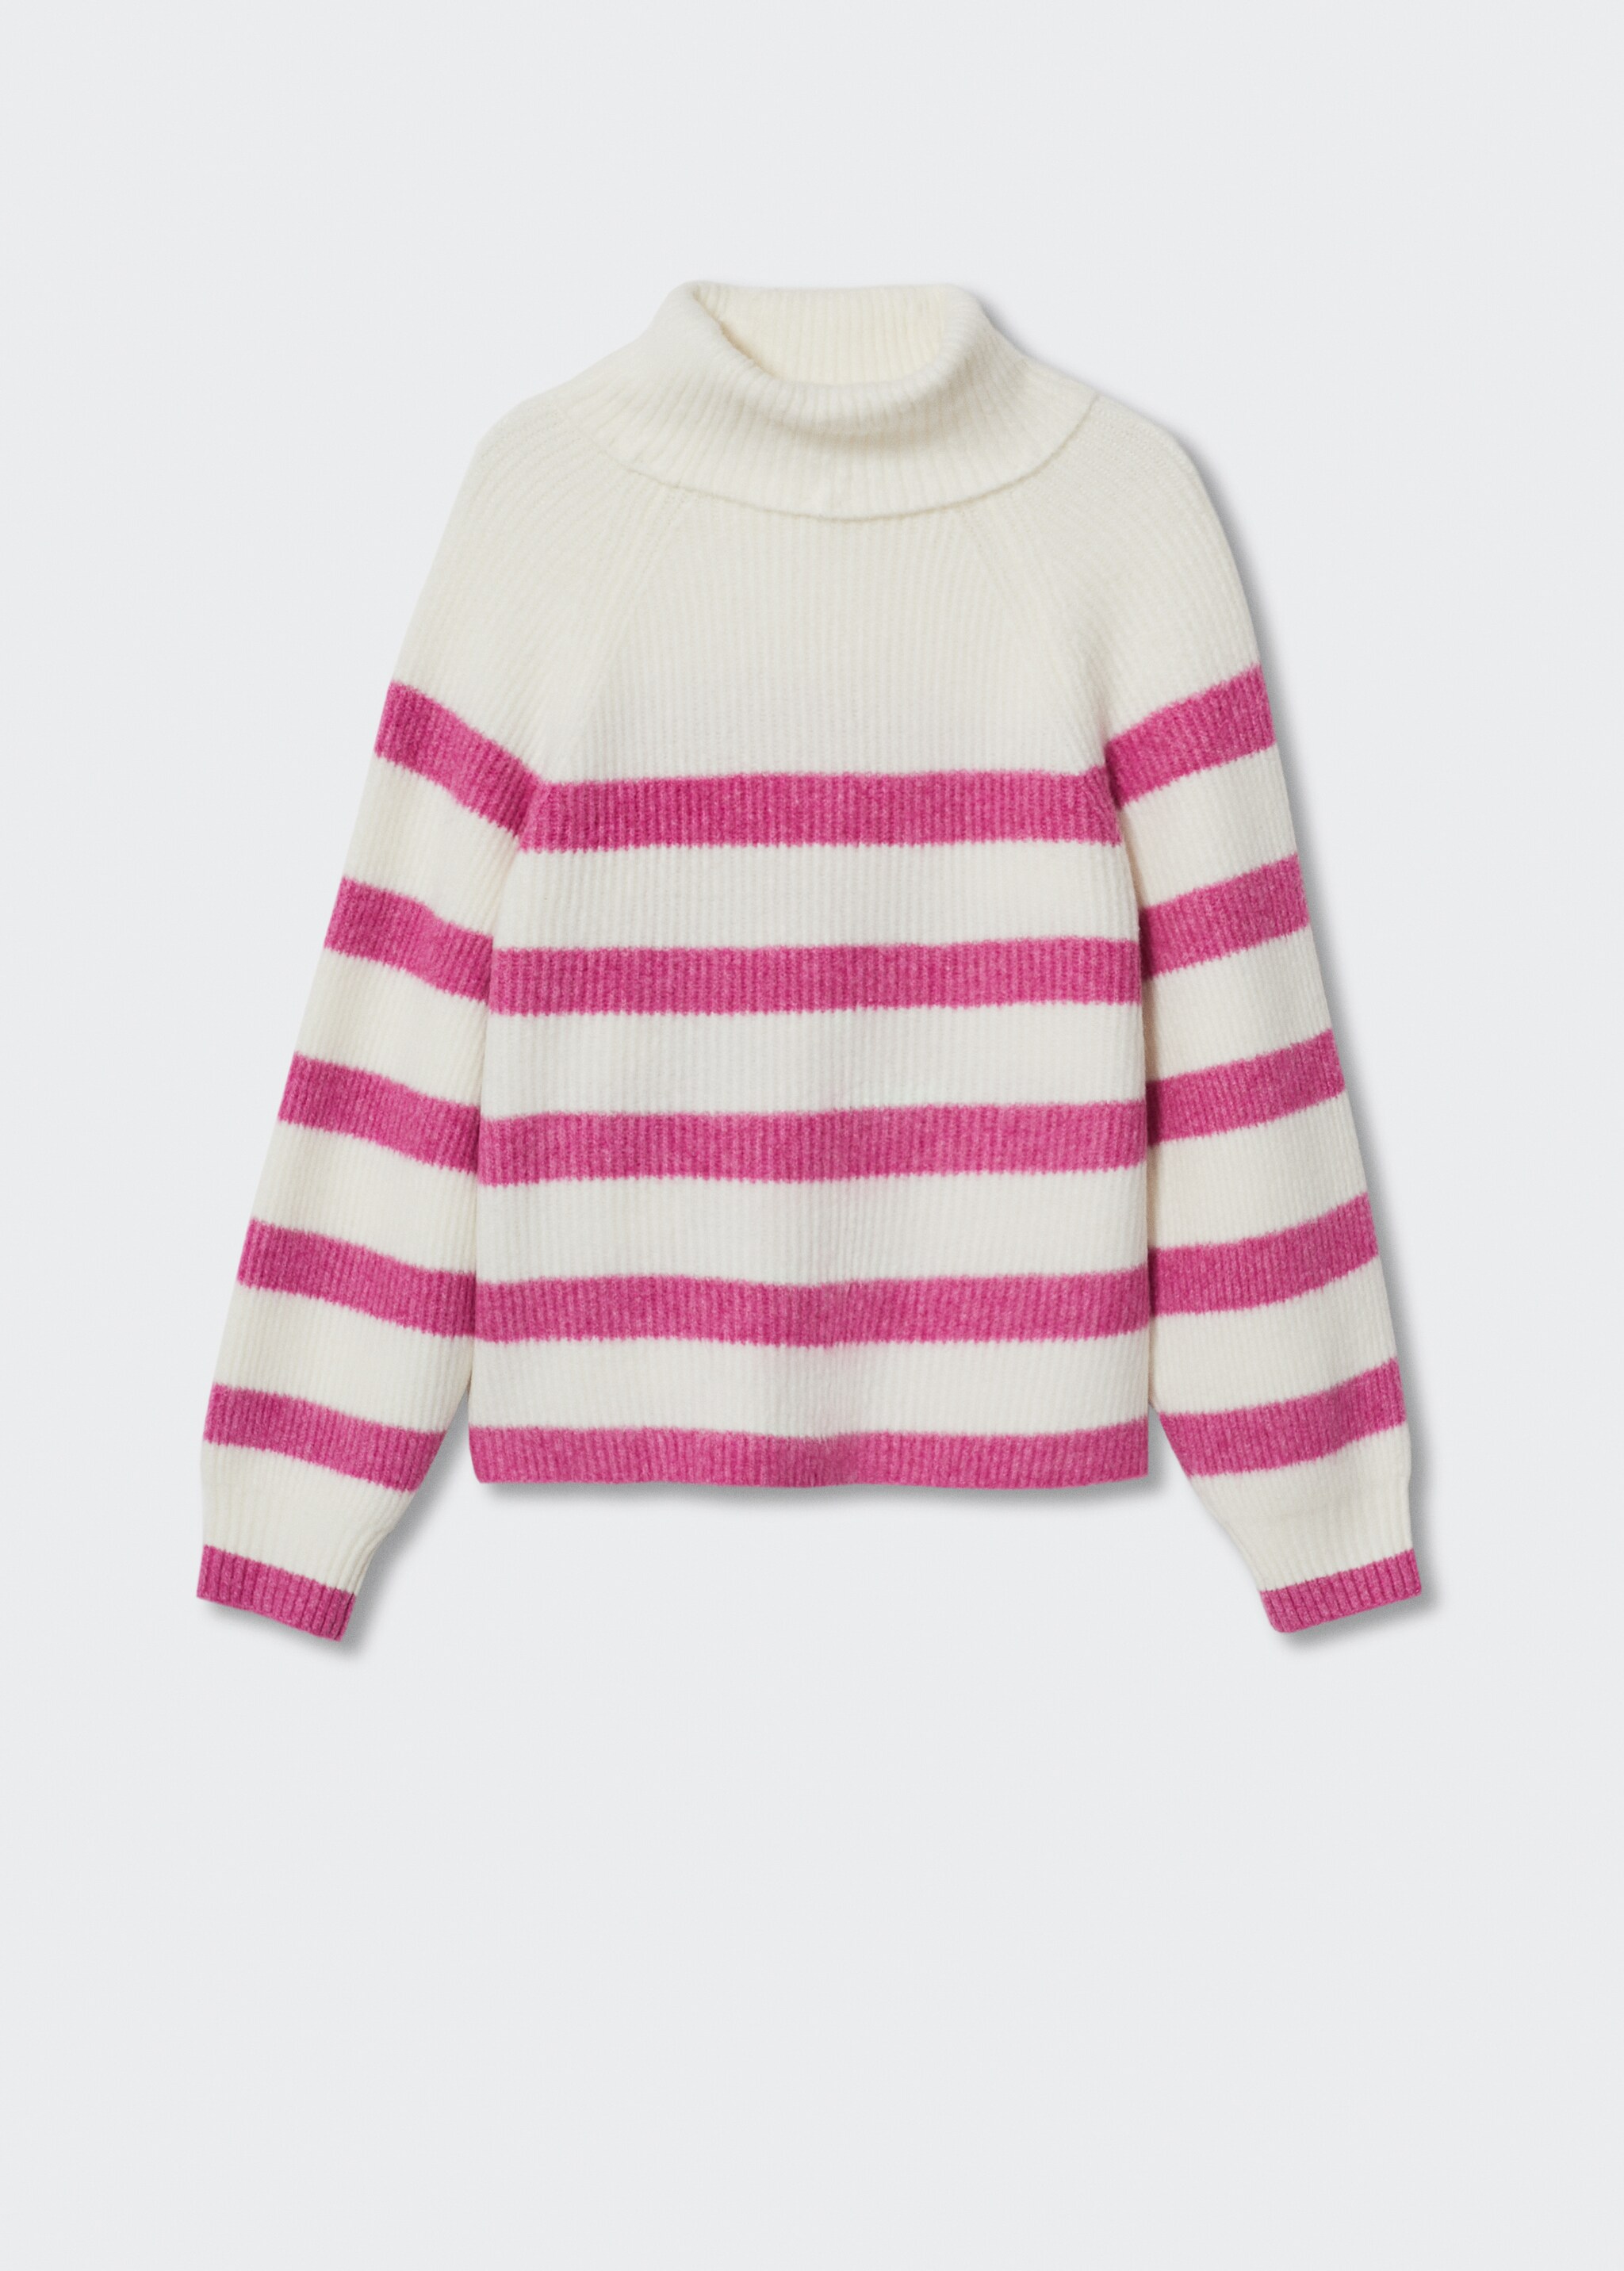 Striped turtleneck sweater - Article without model